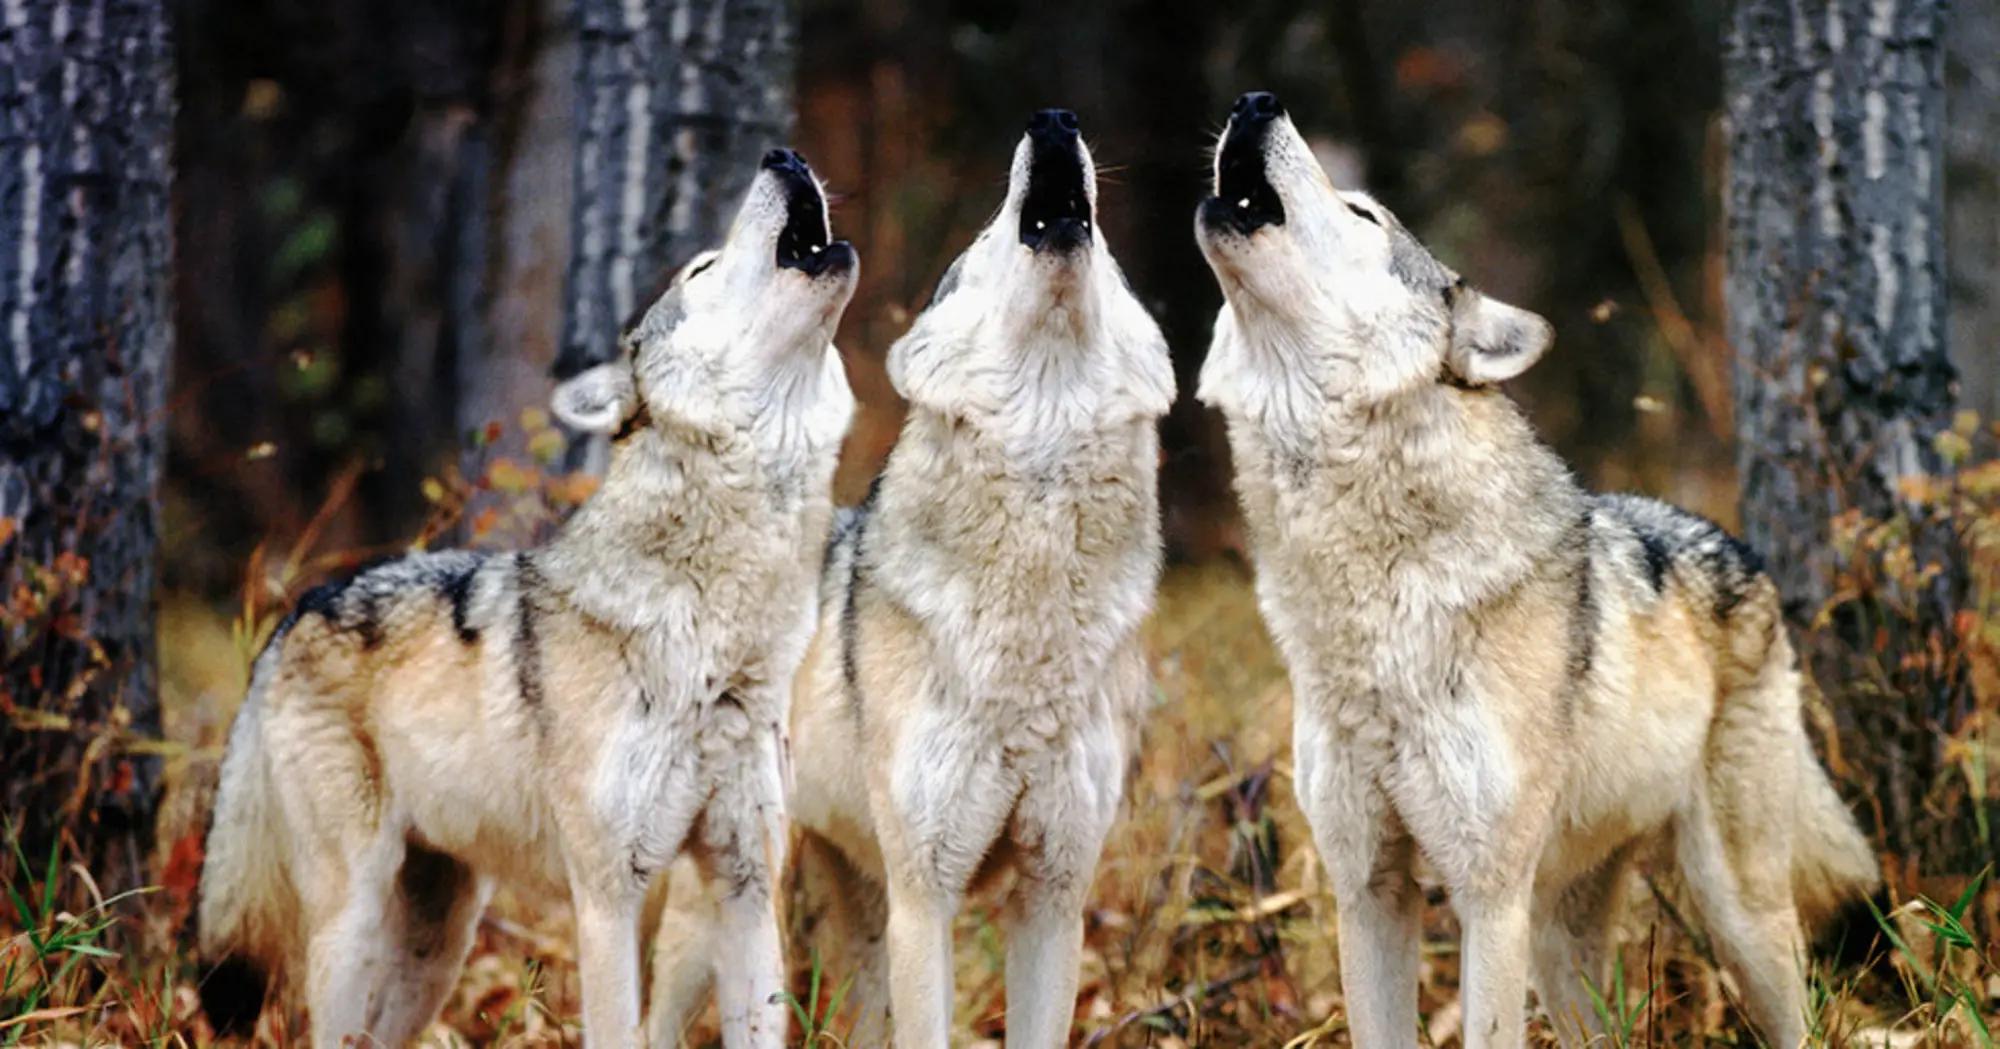 group of dogs howling